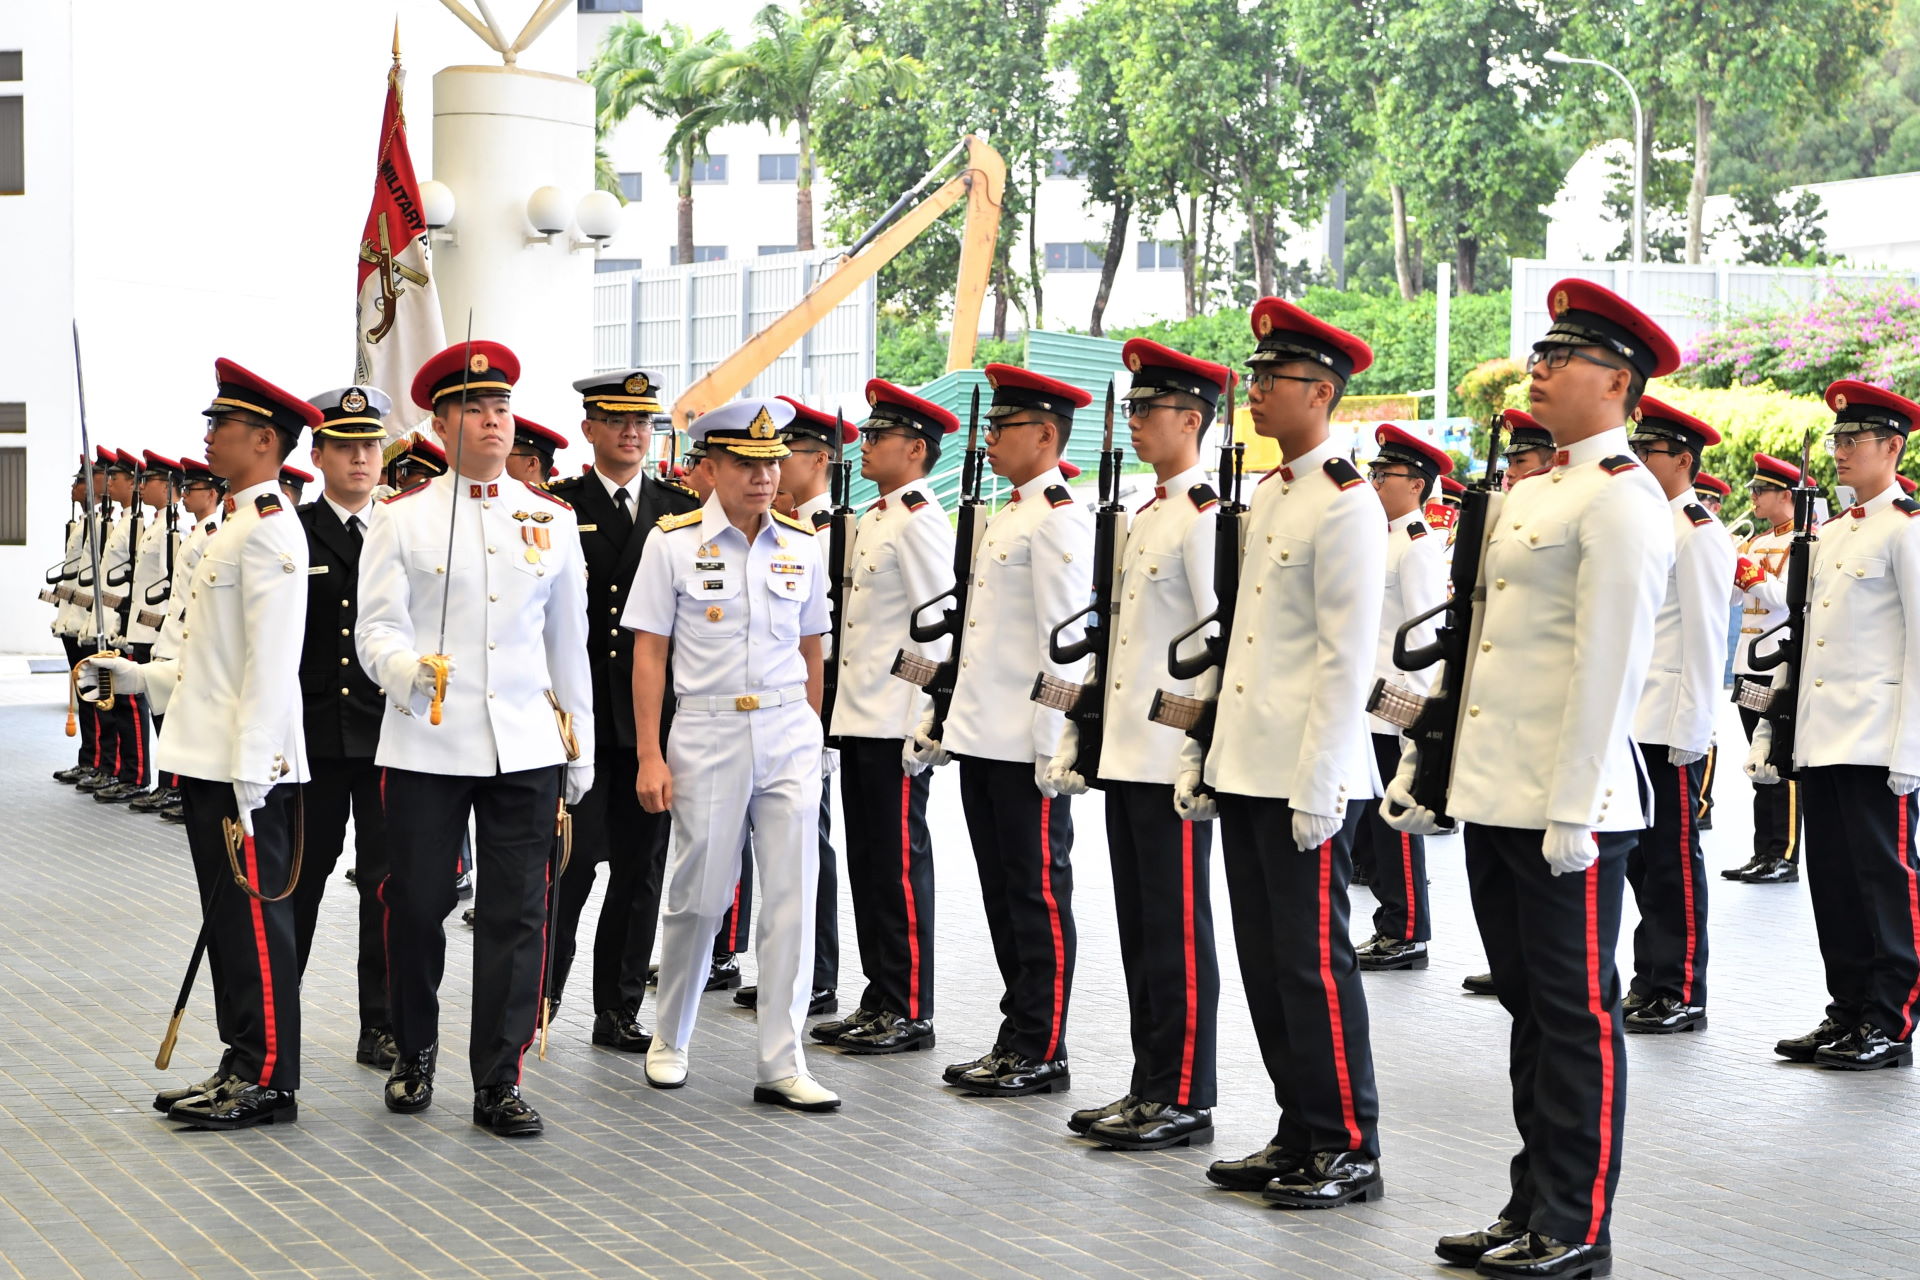 Commander-in-Chief of the Royal Thai Navy Admiral Luechai Ruddit reviewing a Guard of Honour at the Ministry of Defence (MINDEF) earlier this morning.